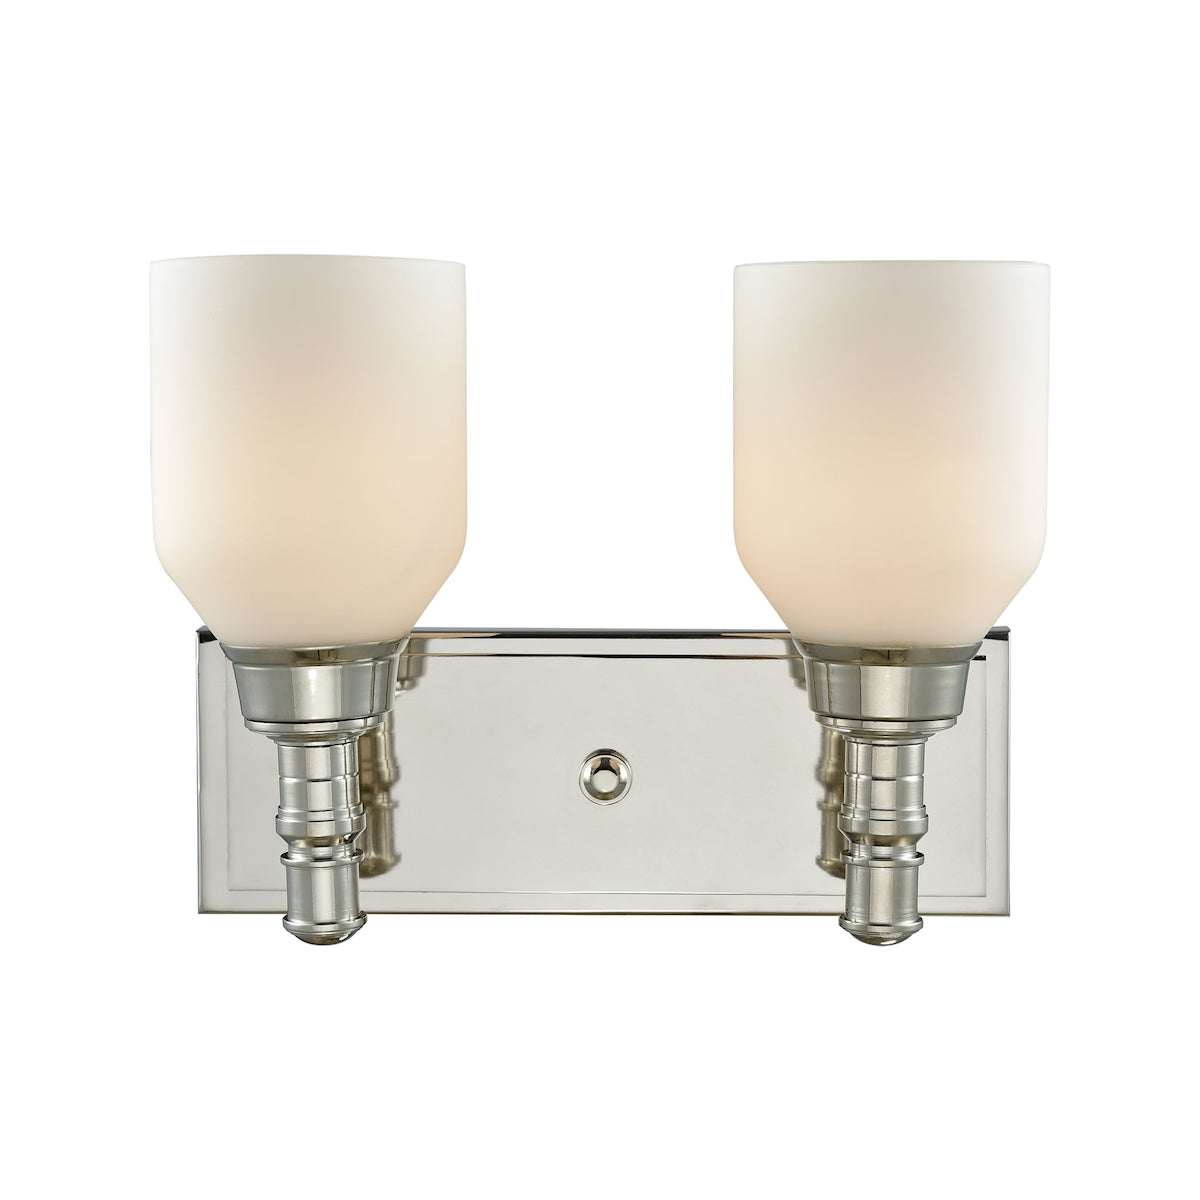 ELK Lighting 32271/2 Baxter 2-Light Vanity Lamp in Polished Nickel with Opal White Glass